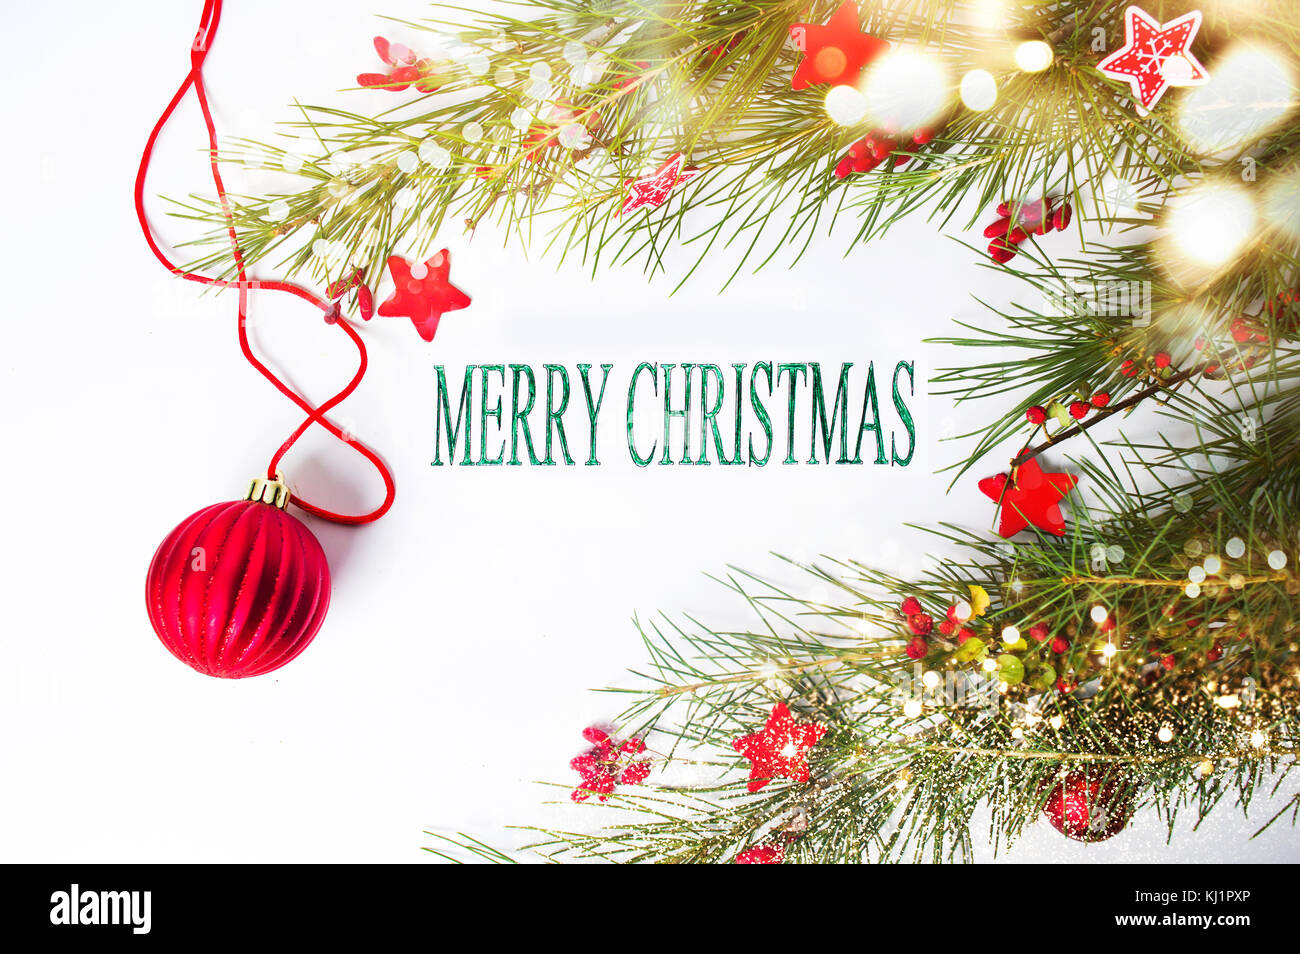 Merry Christmas card with red decorations and fir tree Stock Photo